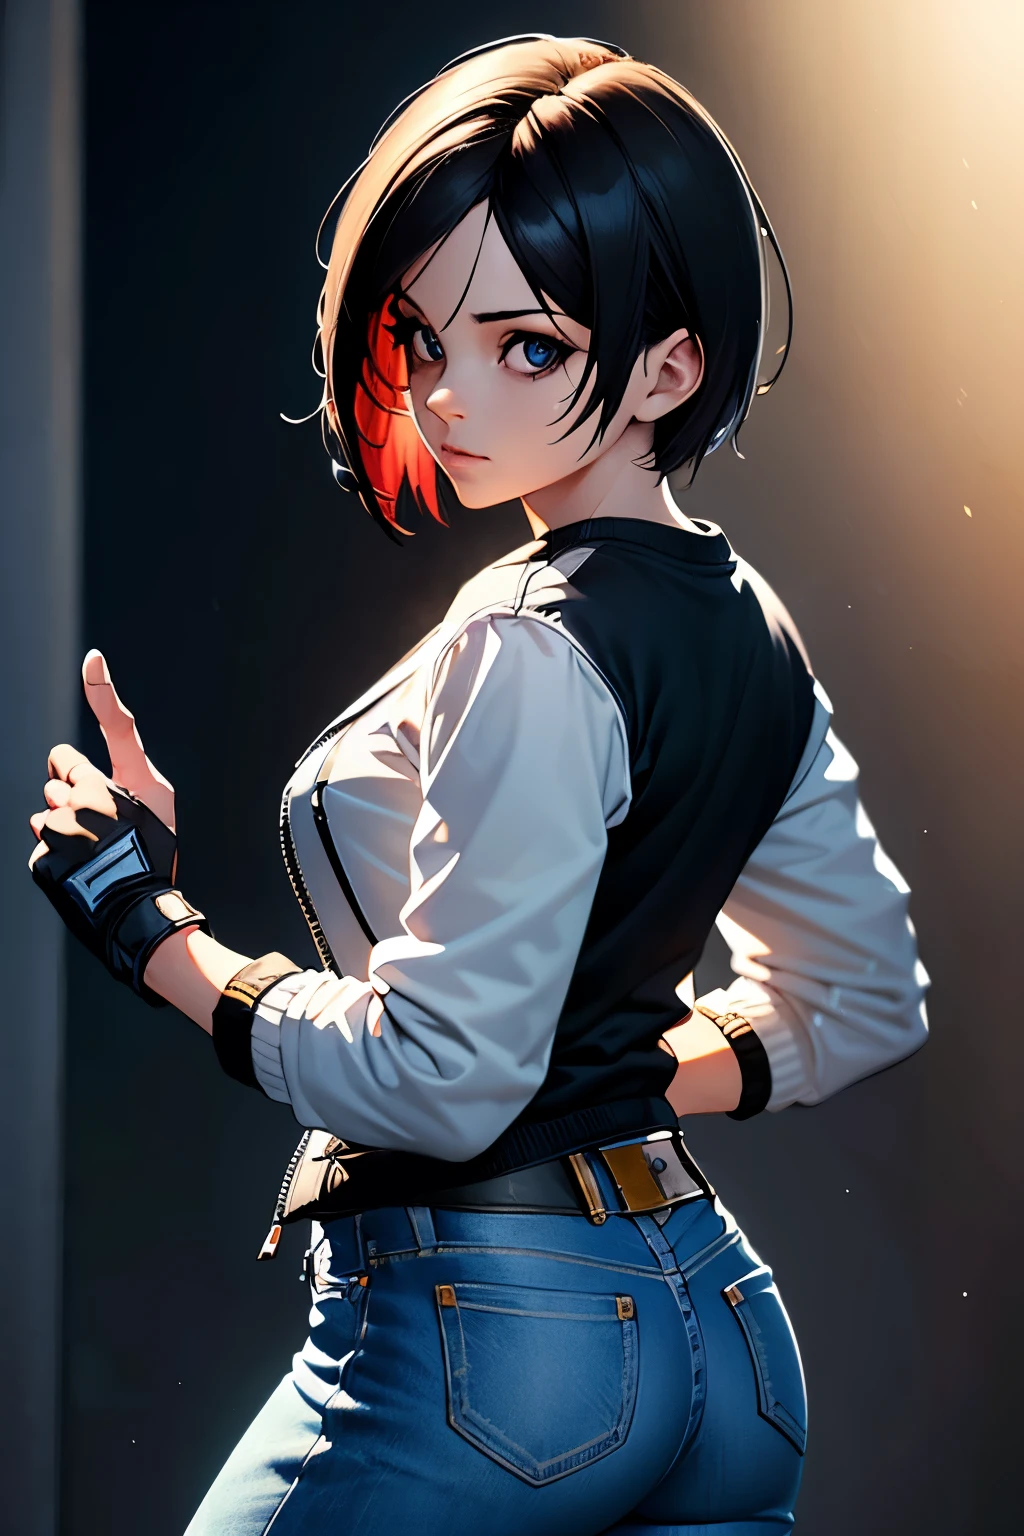 (best quality, highres, ultra-detailed, realistic:1.37), 1 girl, fingerless black gloves pointing upwards, wearing a white jacket, jeans, and a black t-shirt with a white cross, inspired by The King of Fighters style, vivid colors, sharp focus, portraits, medium: digital painting, with a cool-toned color palette, dynamic lighting